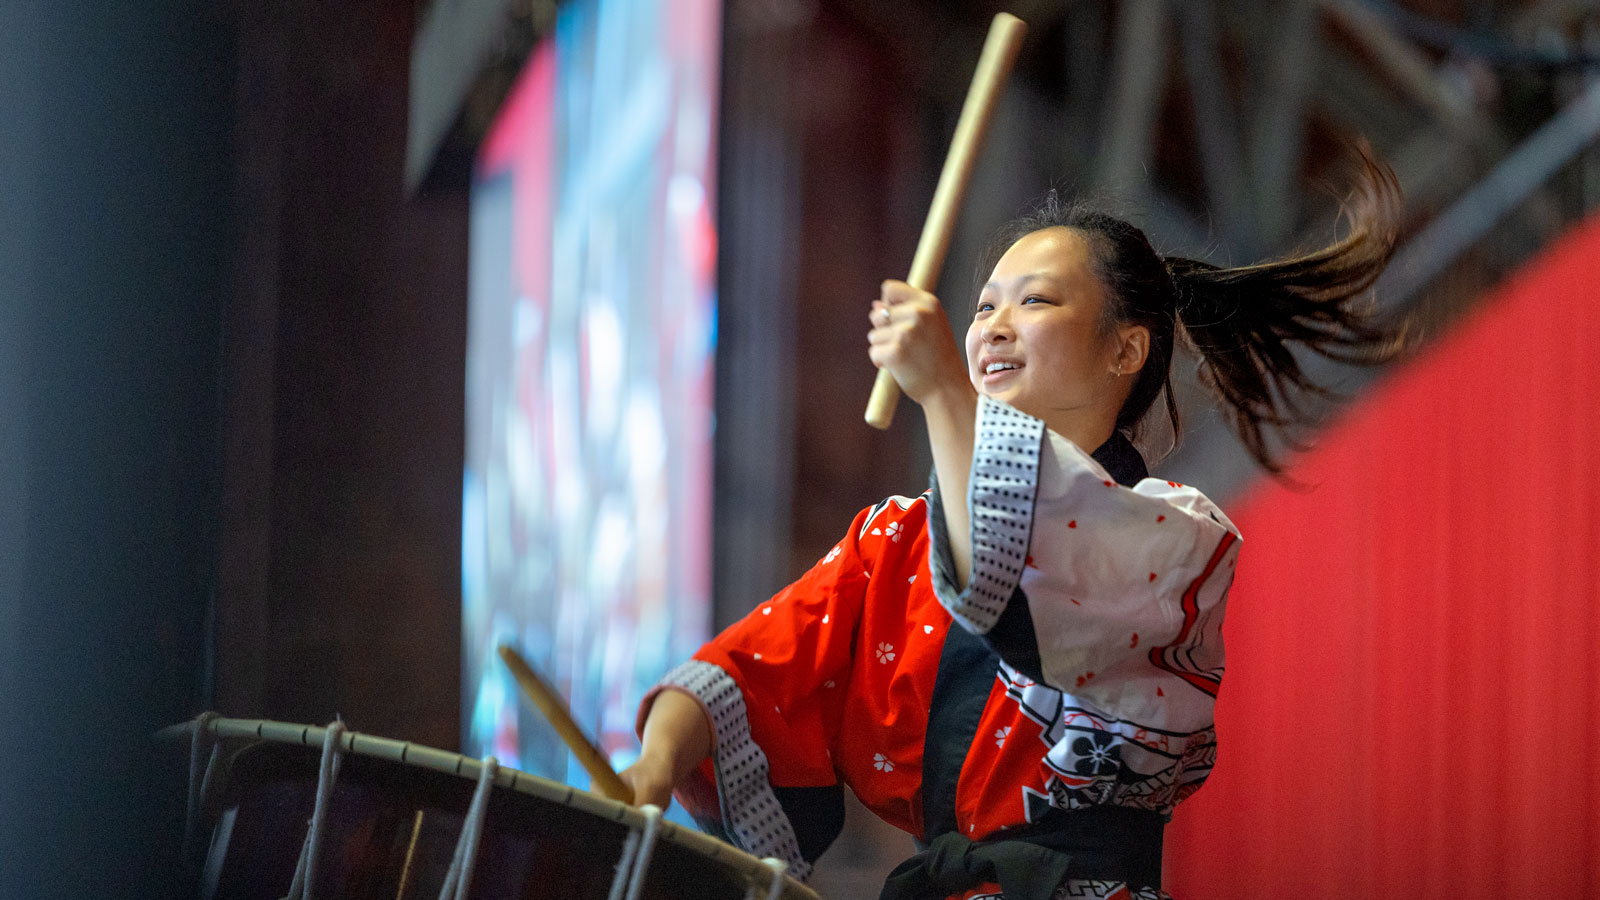 A student plays drums during Senior Convocation ceremonies in Barton Hall as part of Commencement 2024 events